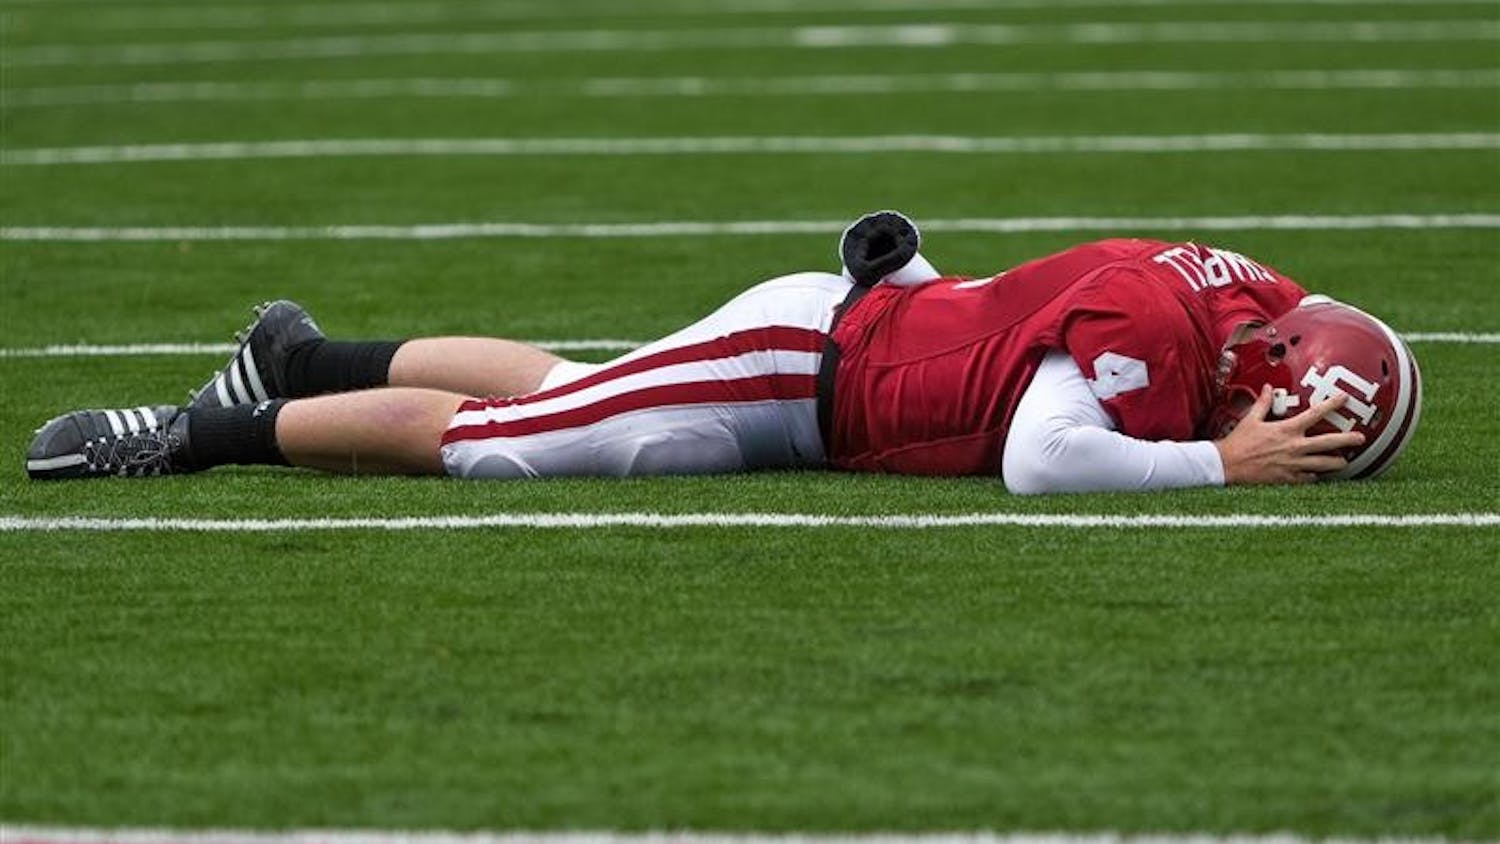 IU sophomore quarterback Ben Chappell lies face down on the field after being injuried during IU's 55-20 loss to Wisconsin on Saturday at Memorial Stadium. Chappell did not return to the game after the play.